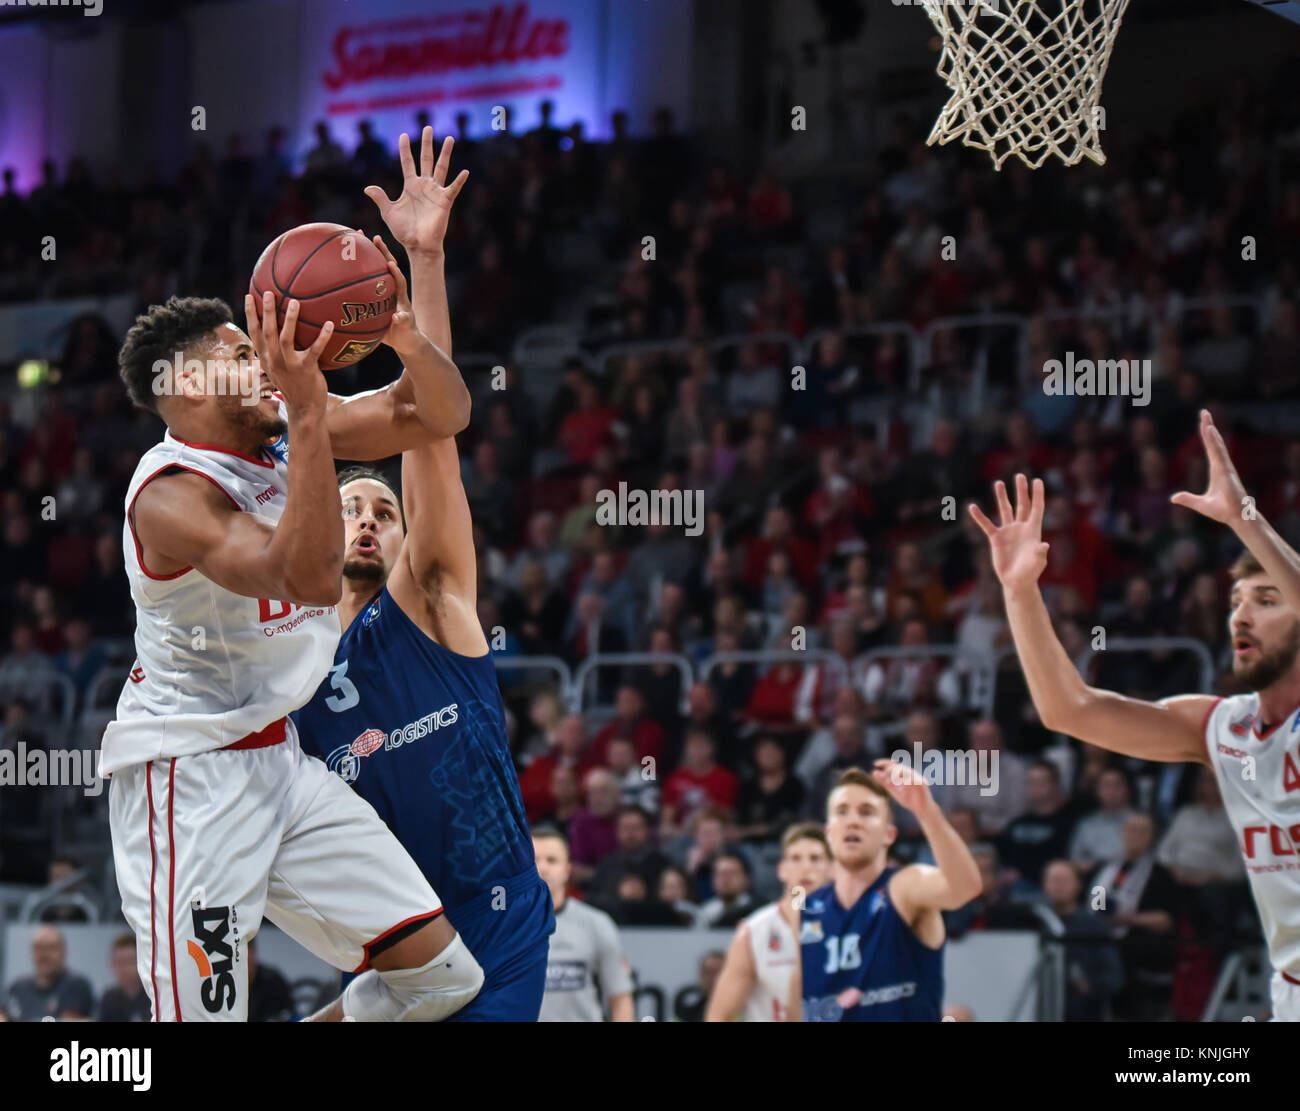 Bbl Basket High Resolution Stock Photography and Images - Alamy